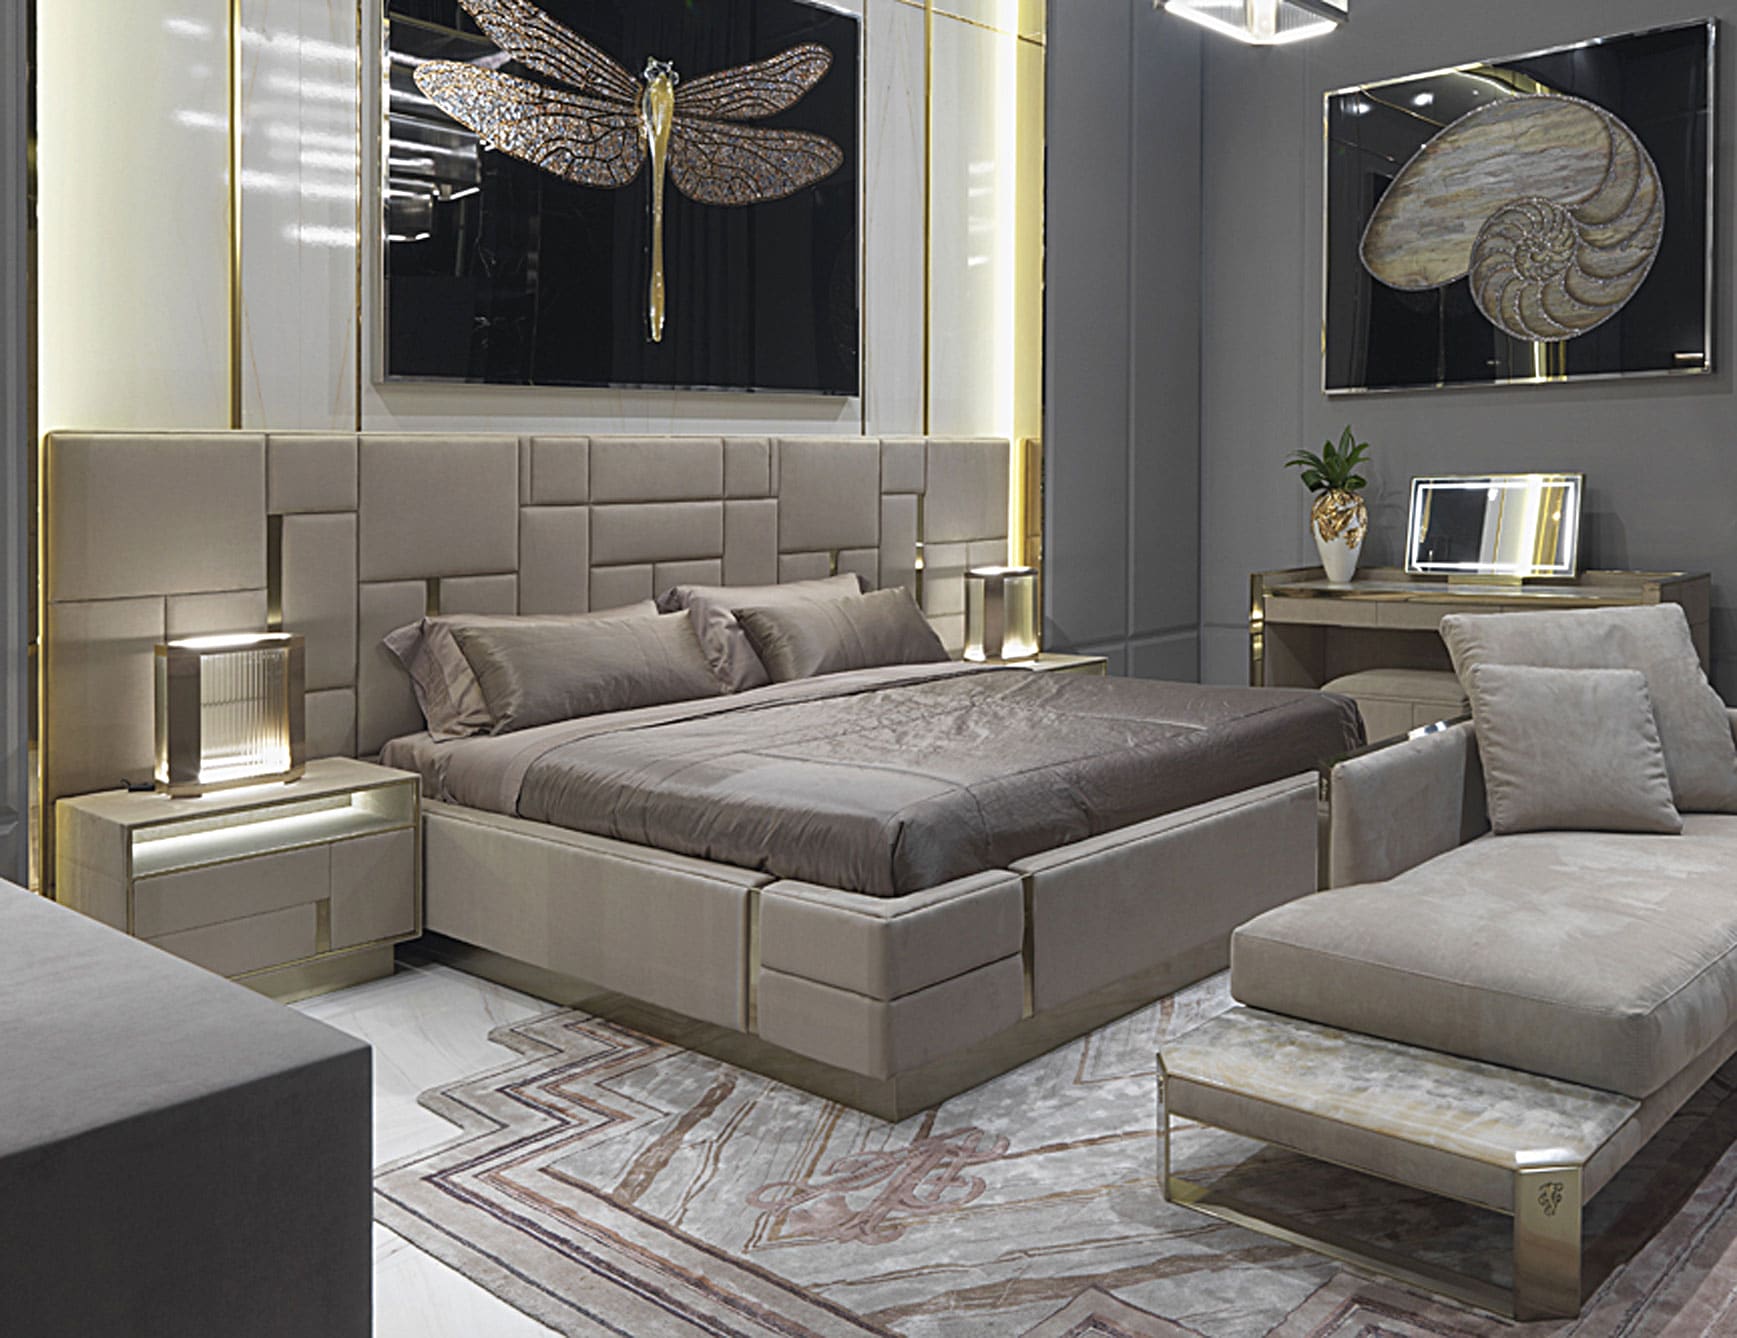 Beloved modern luxury bed with beige leather